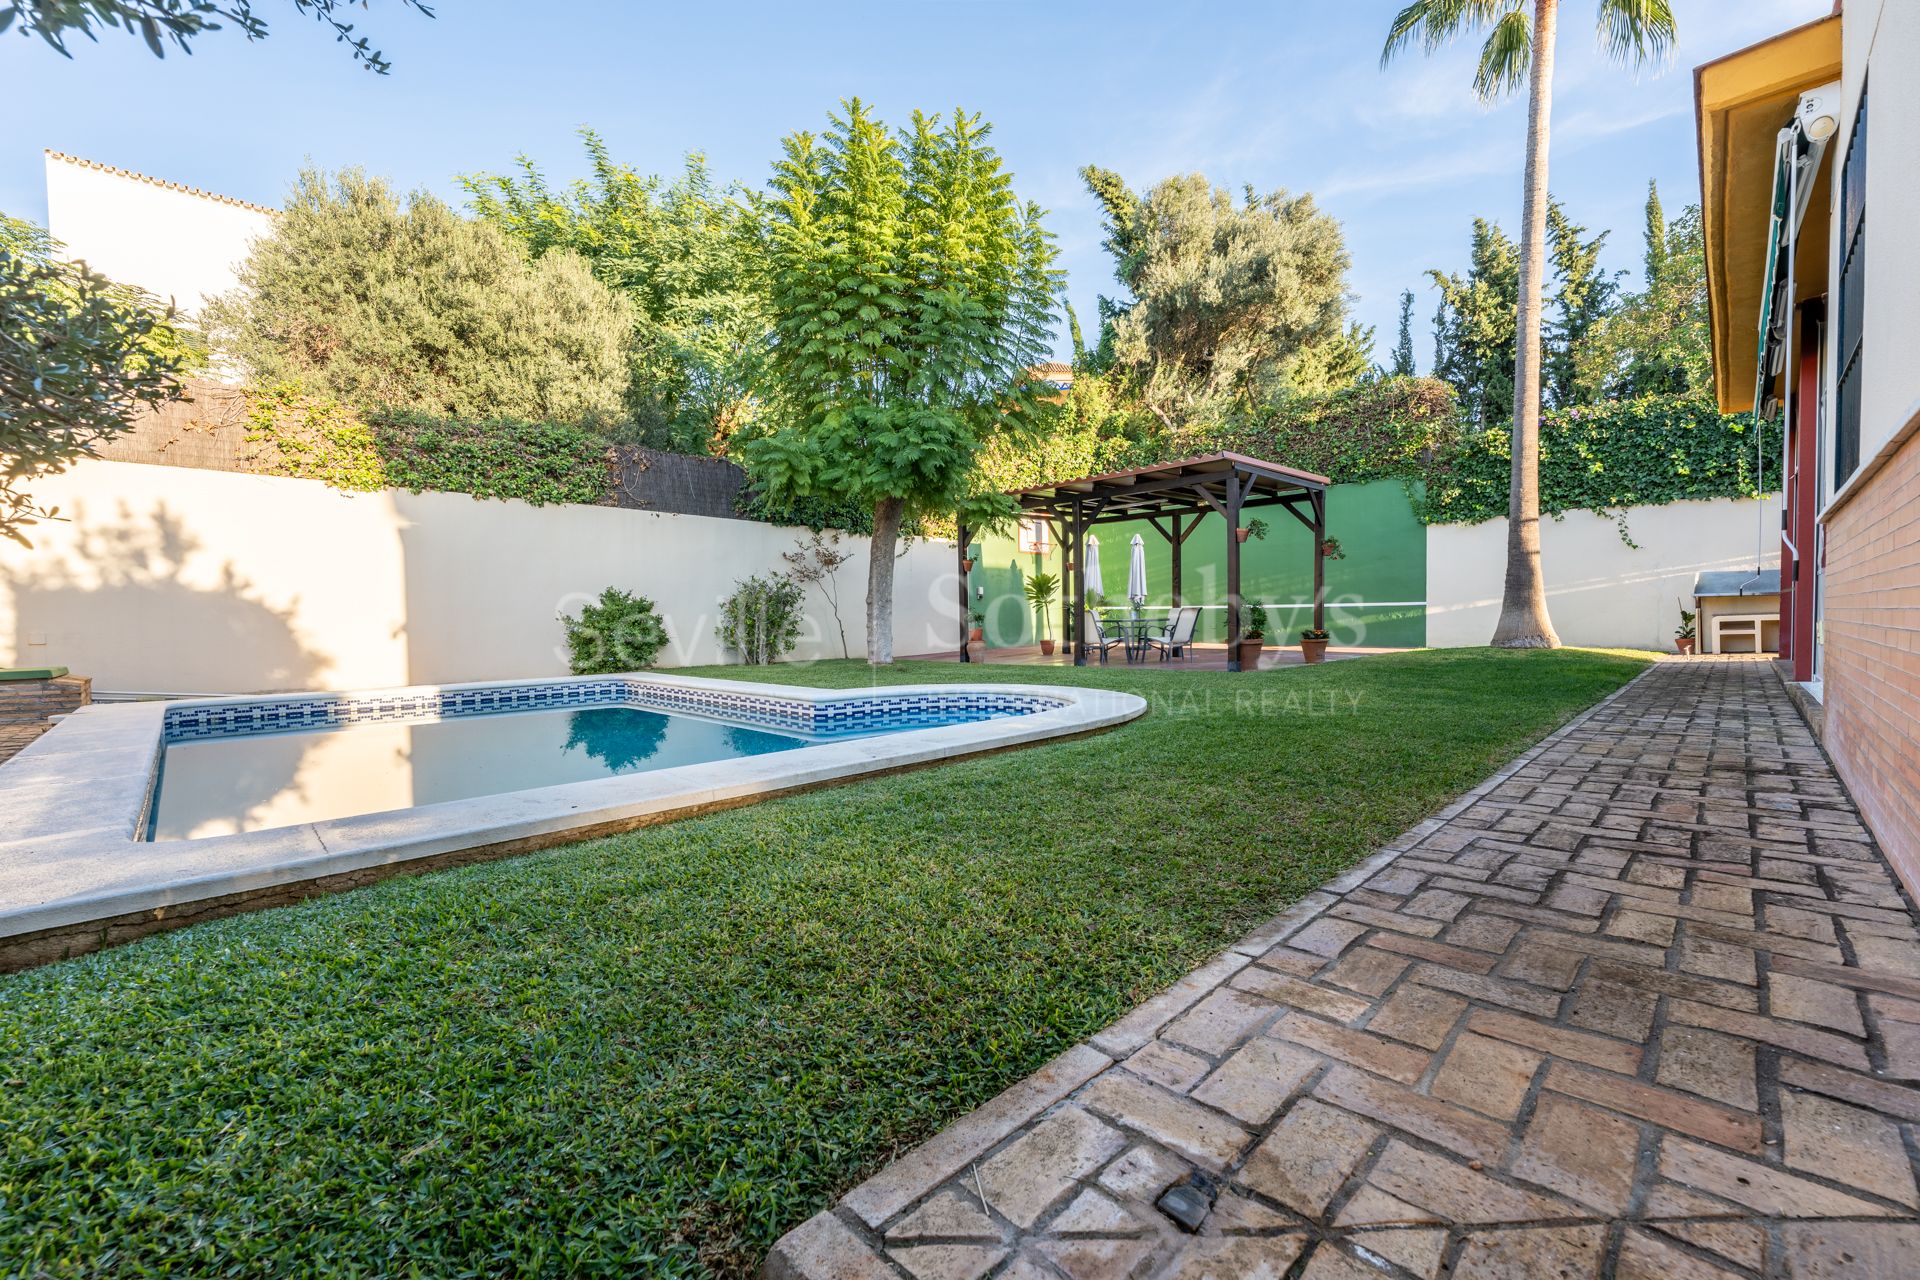 Independent house in gated community Cerros de Montequinto.